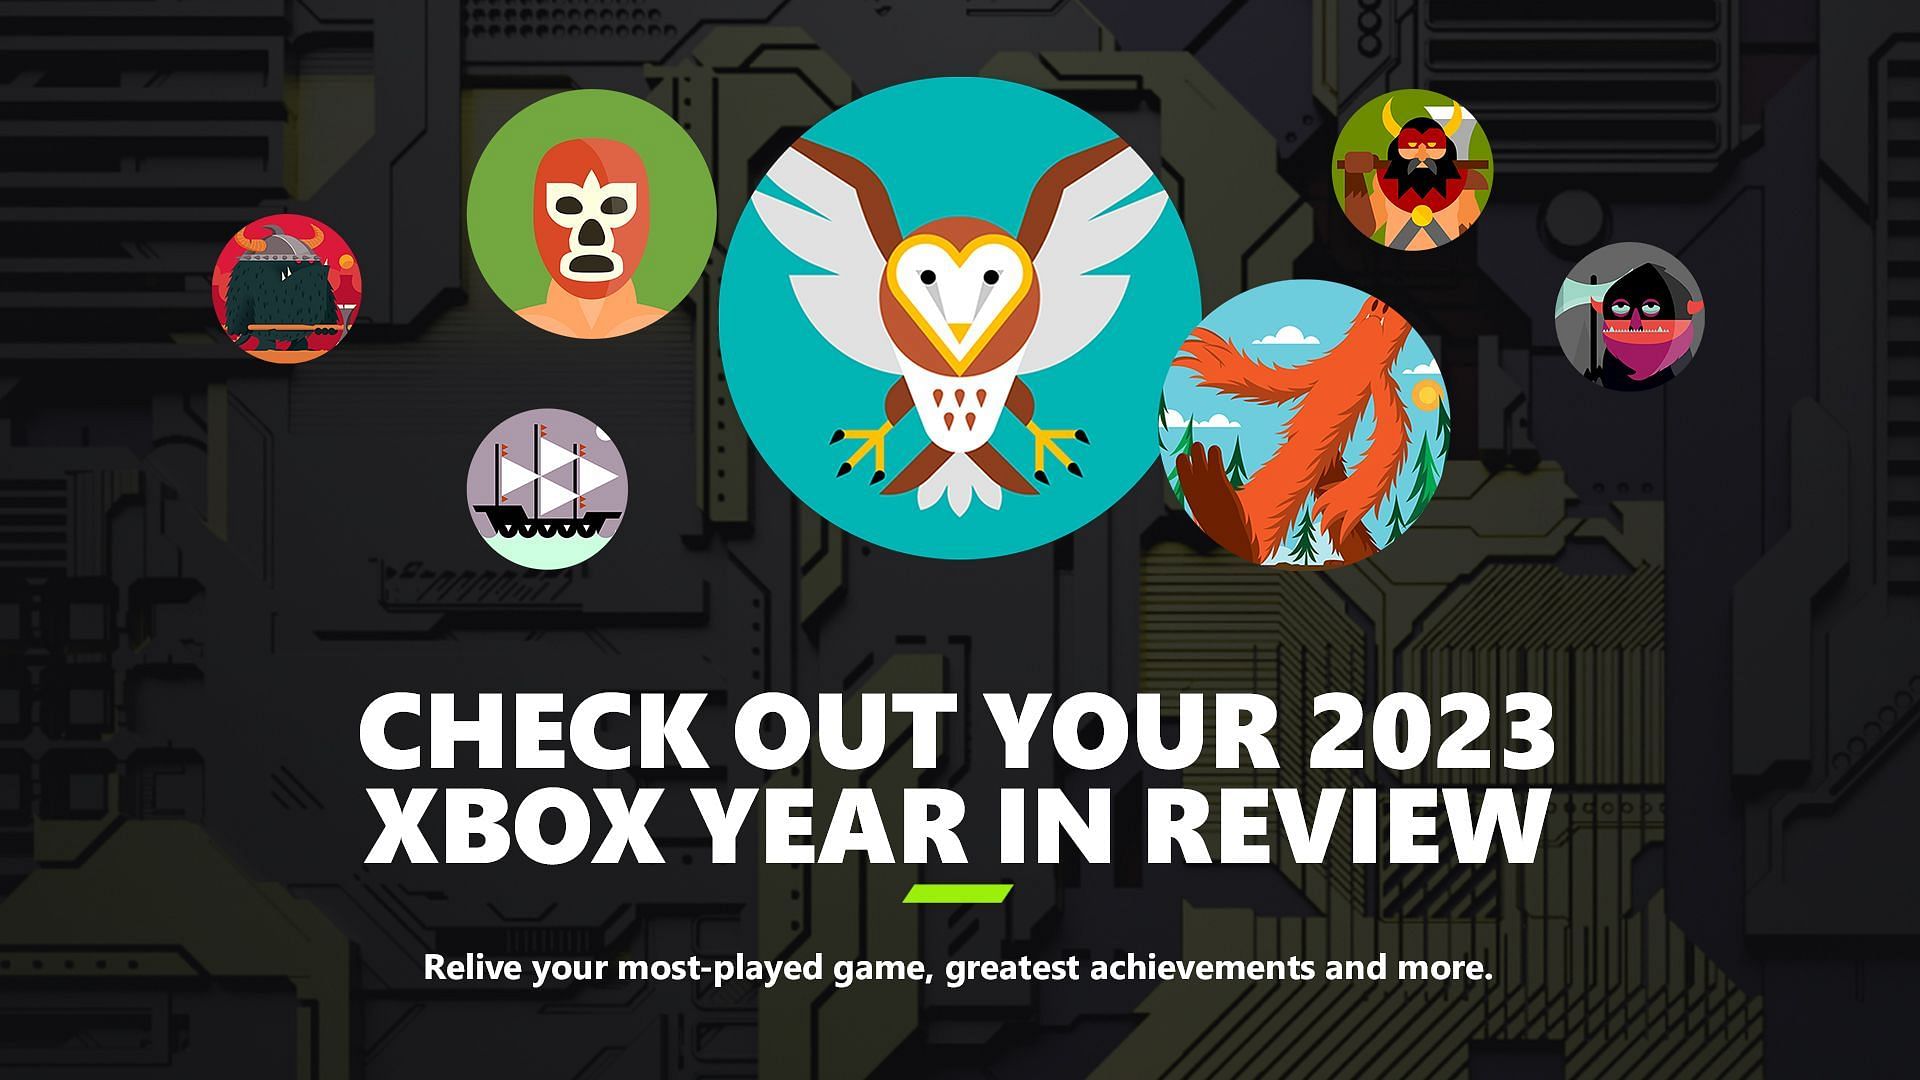 Xbox users can now access their year in reviews for 2023 (Image via Xbox)